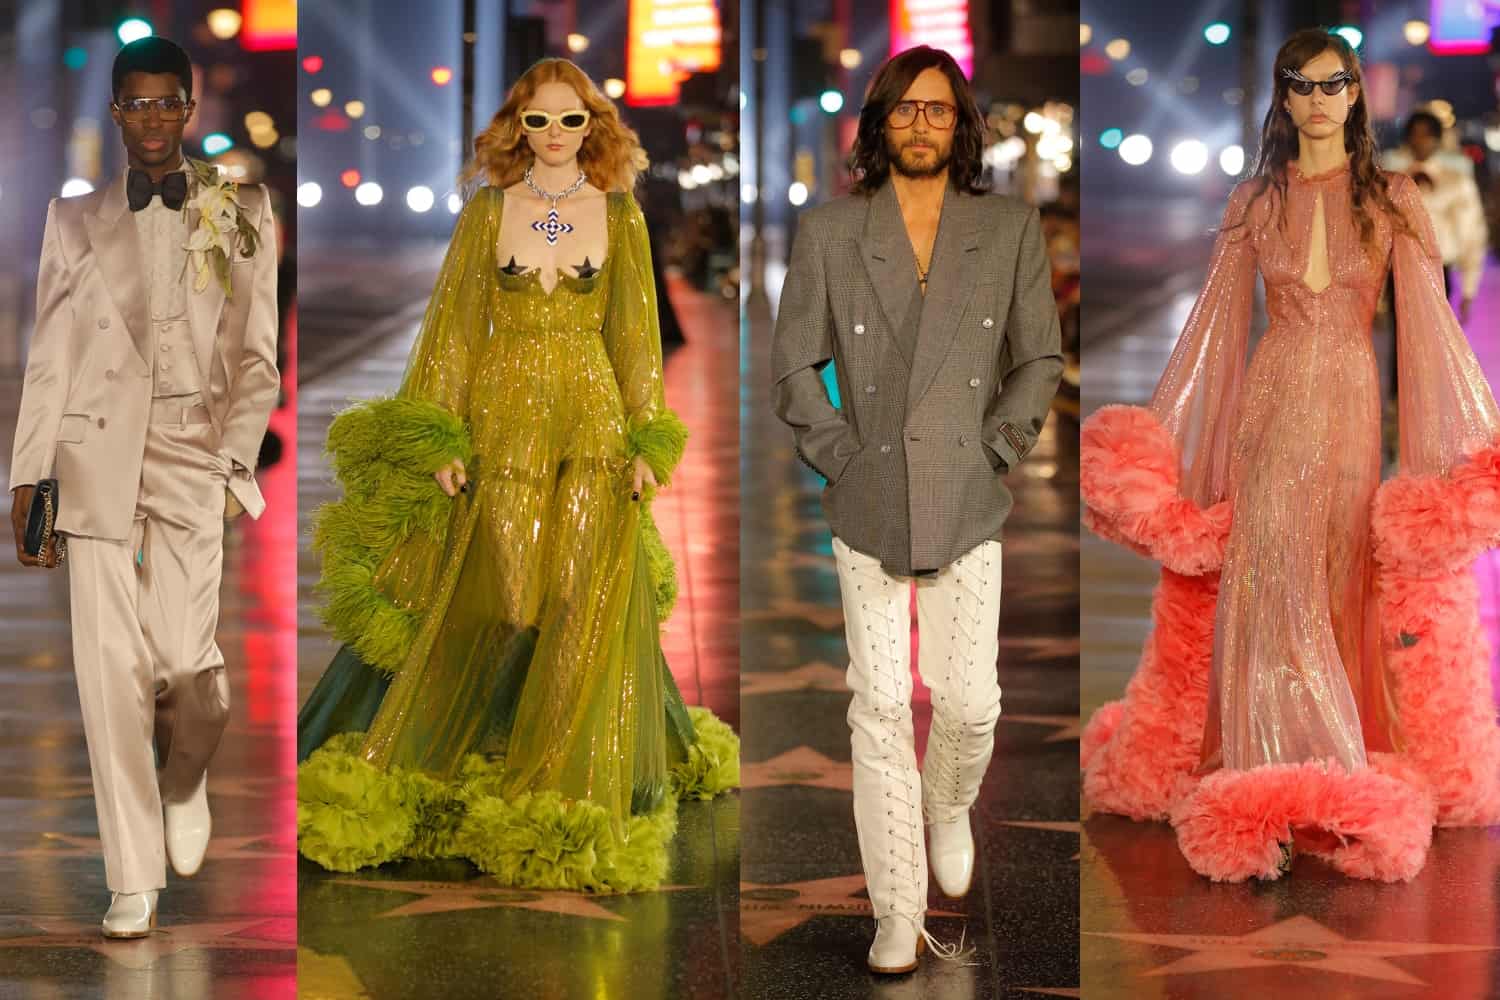 Love is all around: Gucci Love Parade takes over the Hollywood